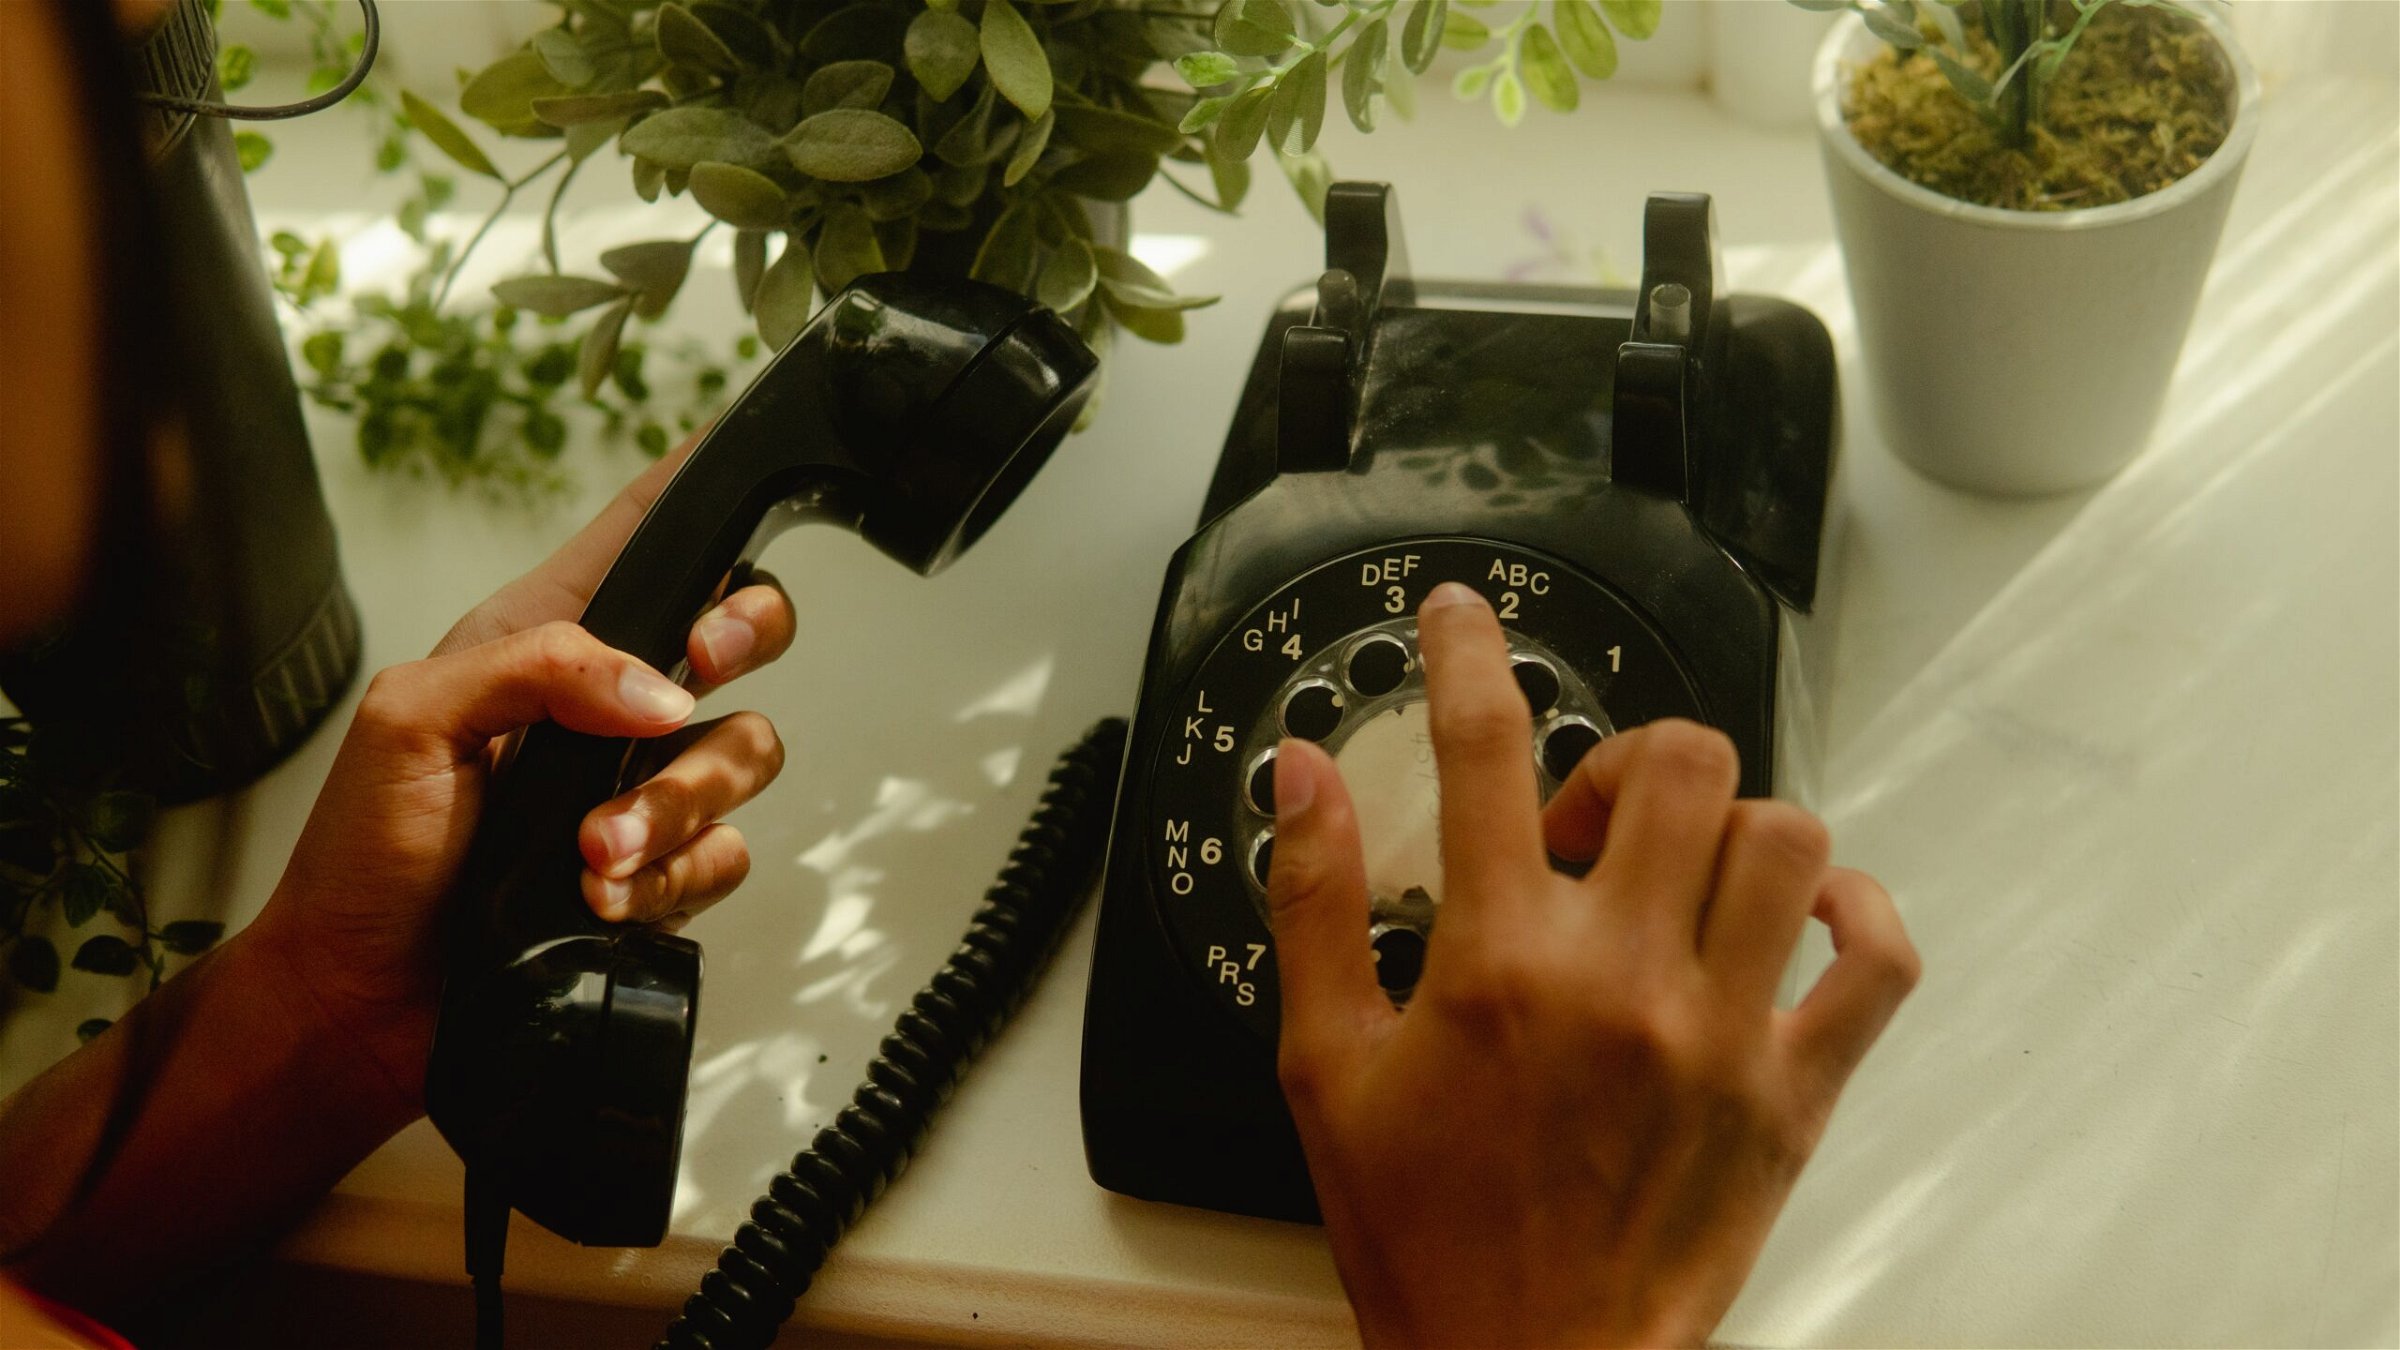 Image of someone dialing a rotary phone - Destination Certification